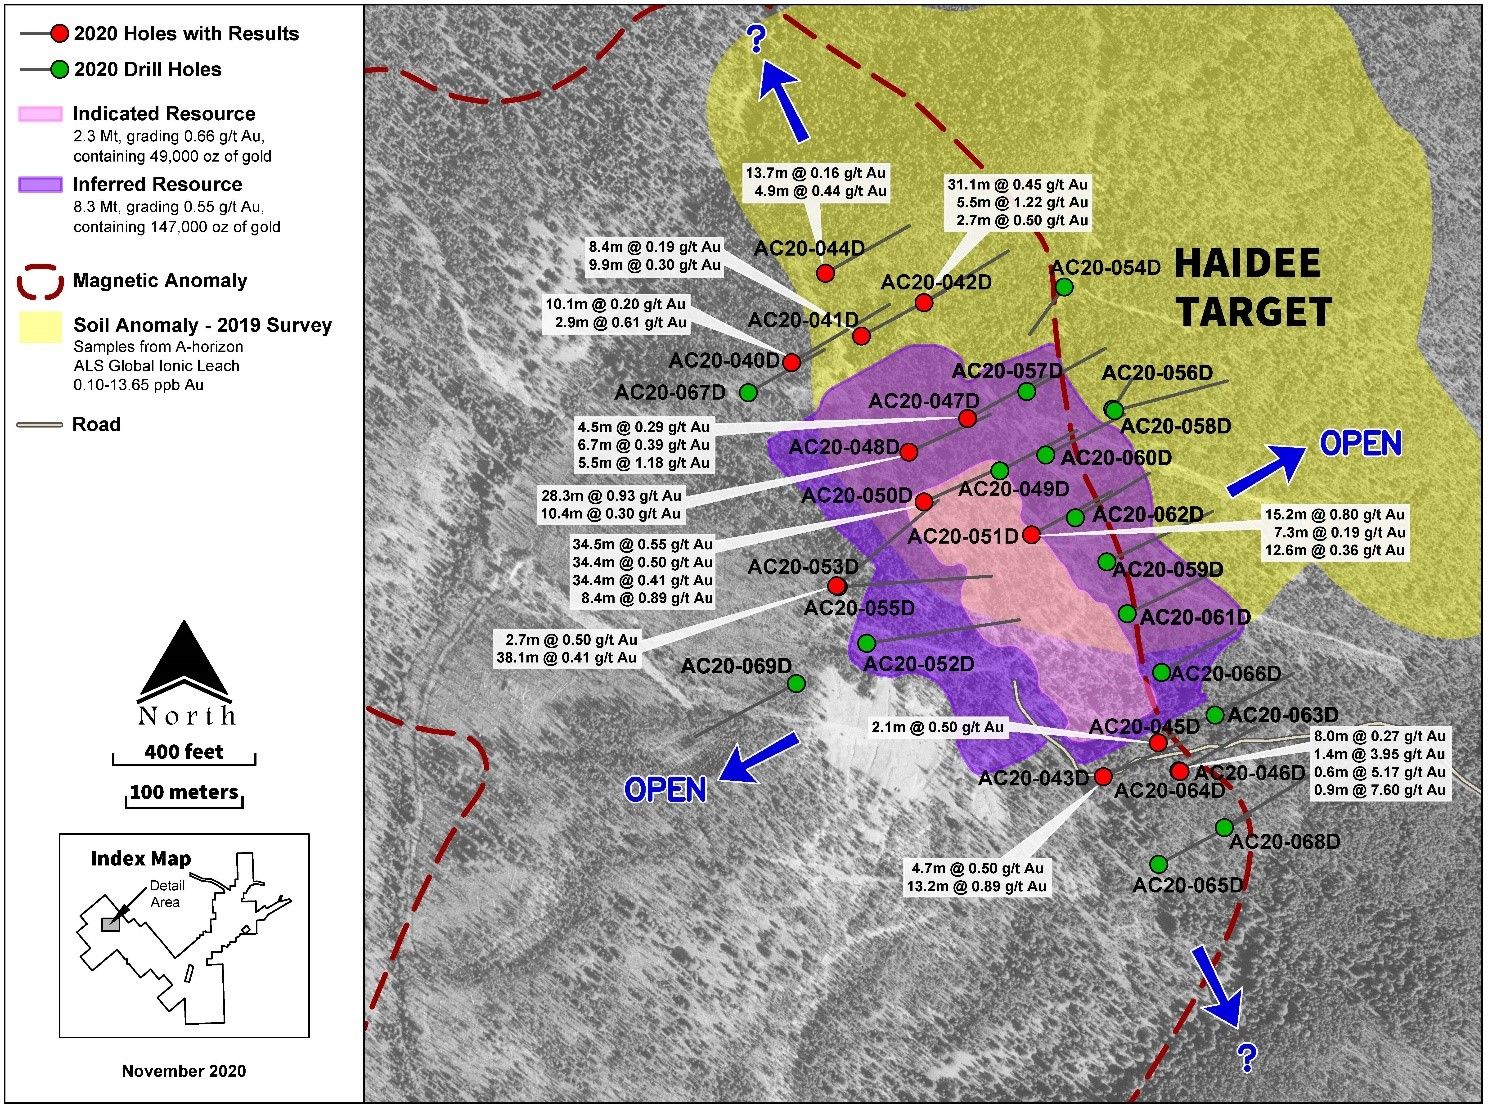 Revival Gold Releases Additional Drill Results and Provides Exploration Update